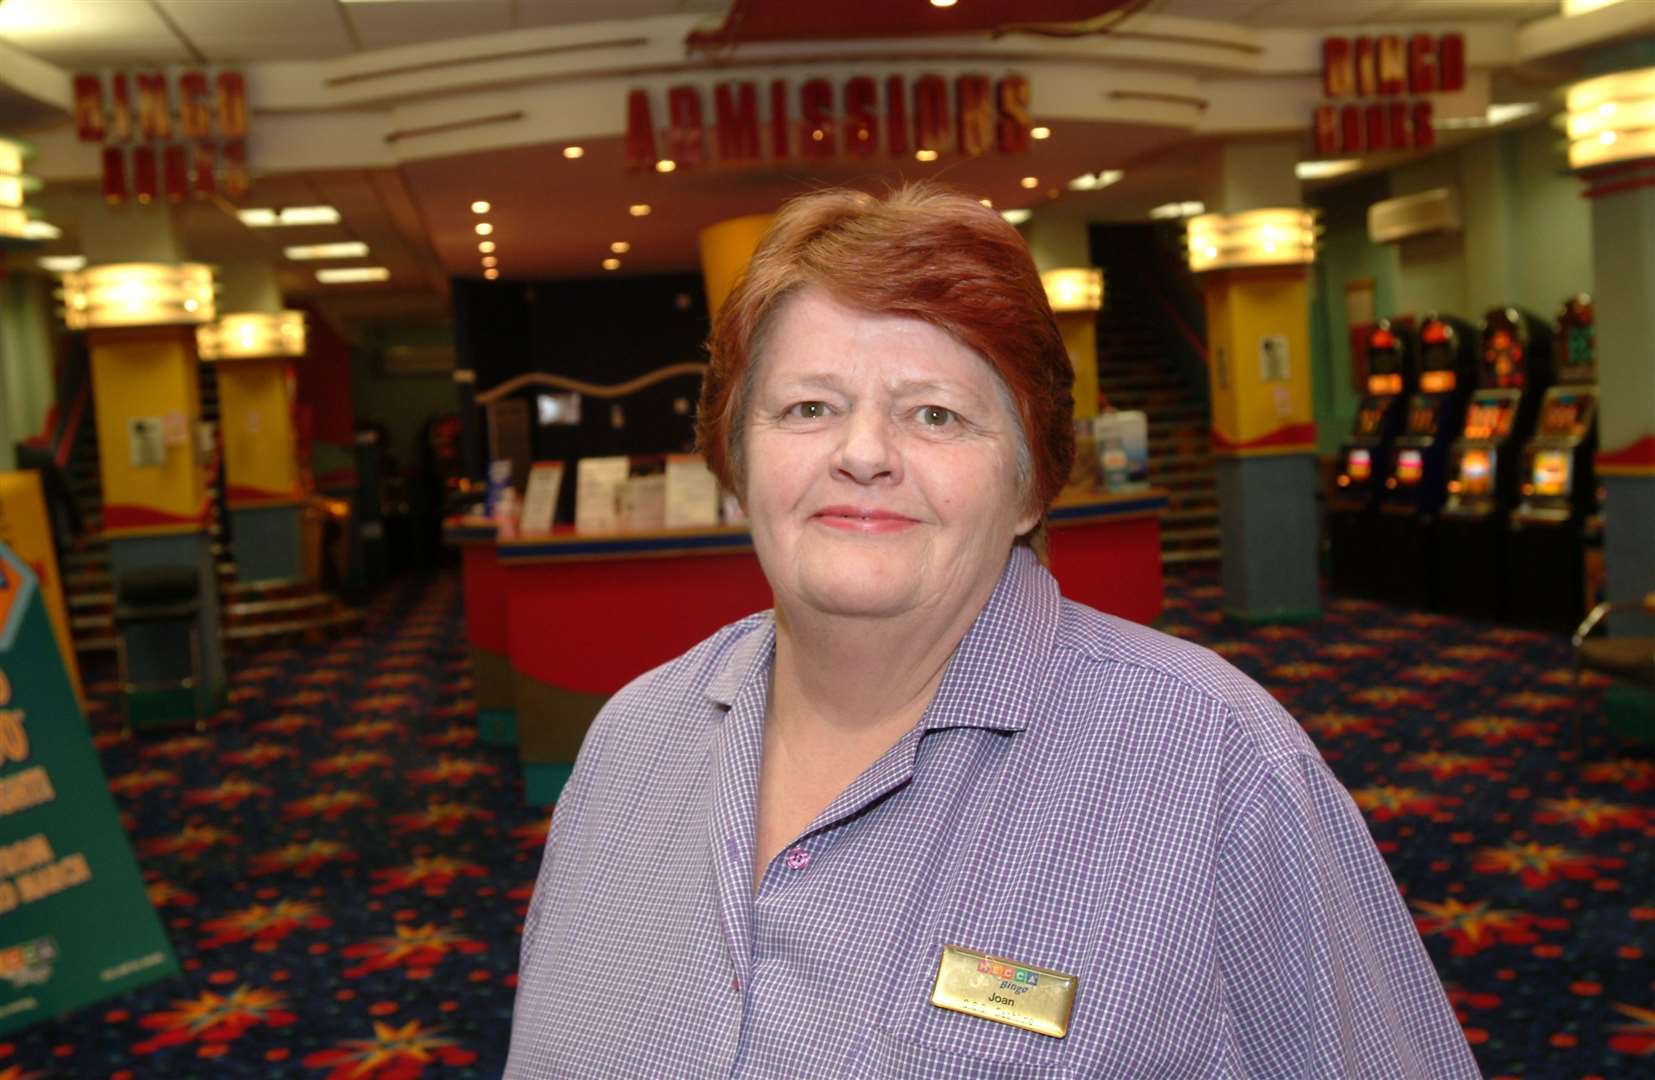 Joan Sage - pictured here in March 2006 - worked at the bingo hall for 30 years